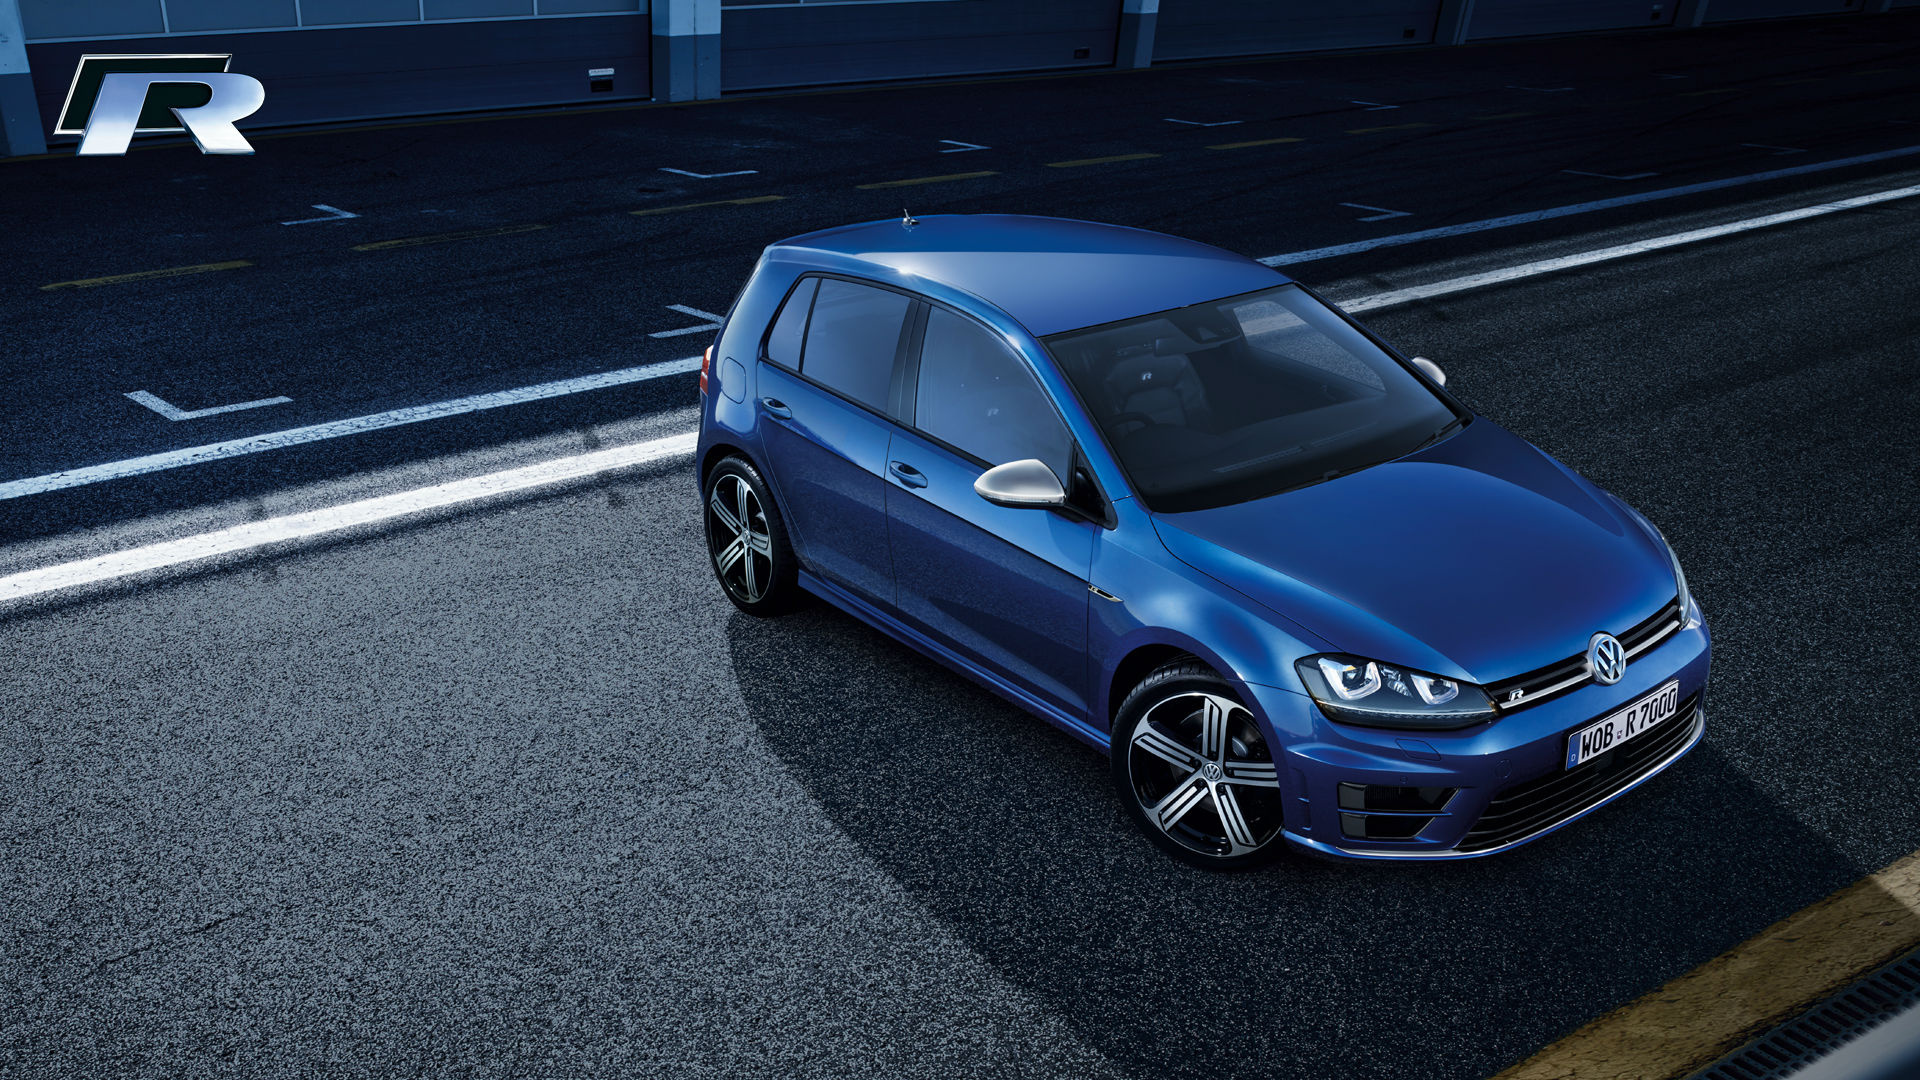 Volkswagen Golf, Sporty and powerful, Golf R edition, Impressive wallpapers, 1920x1080 Full HD Desktop